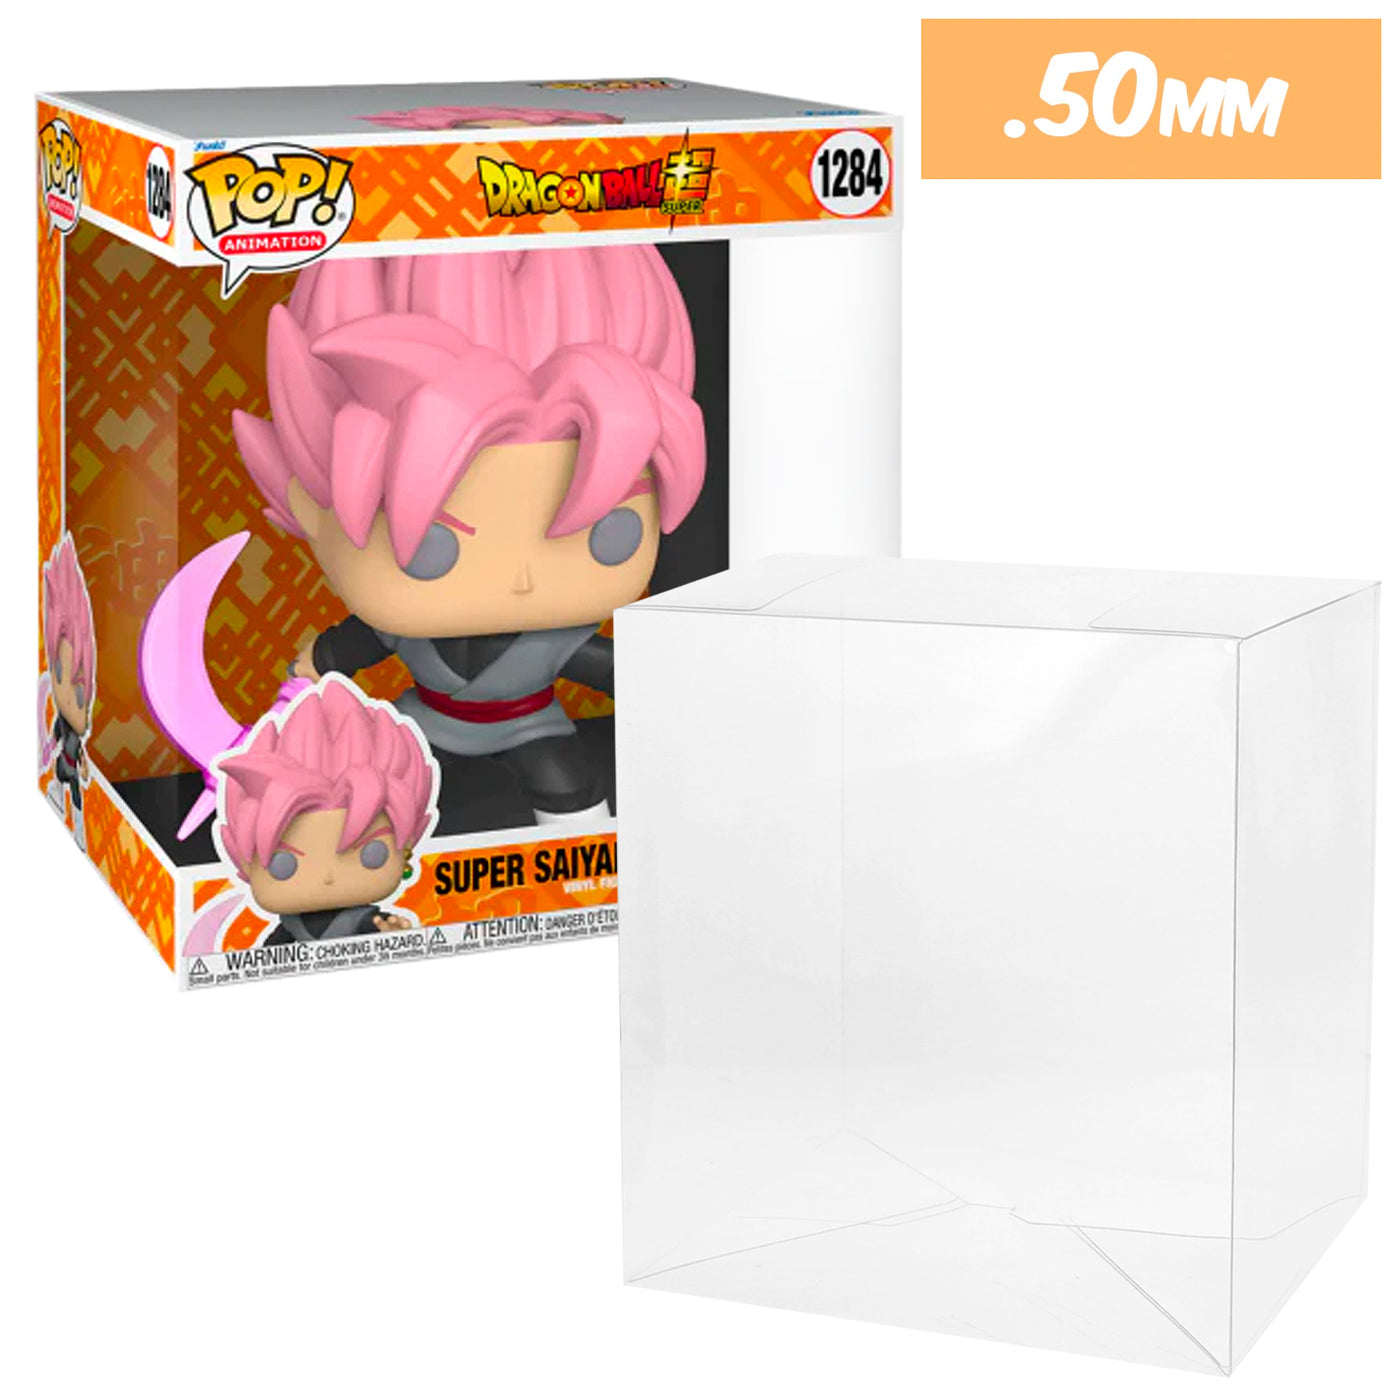 10 inch wide new size dragon ball super saiyan rose goku 1284 best funko pop protectors thick strong uv scratch flat top stack vinyl display geek plastic shield vaulted eco armor fits collect protect display case kollector